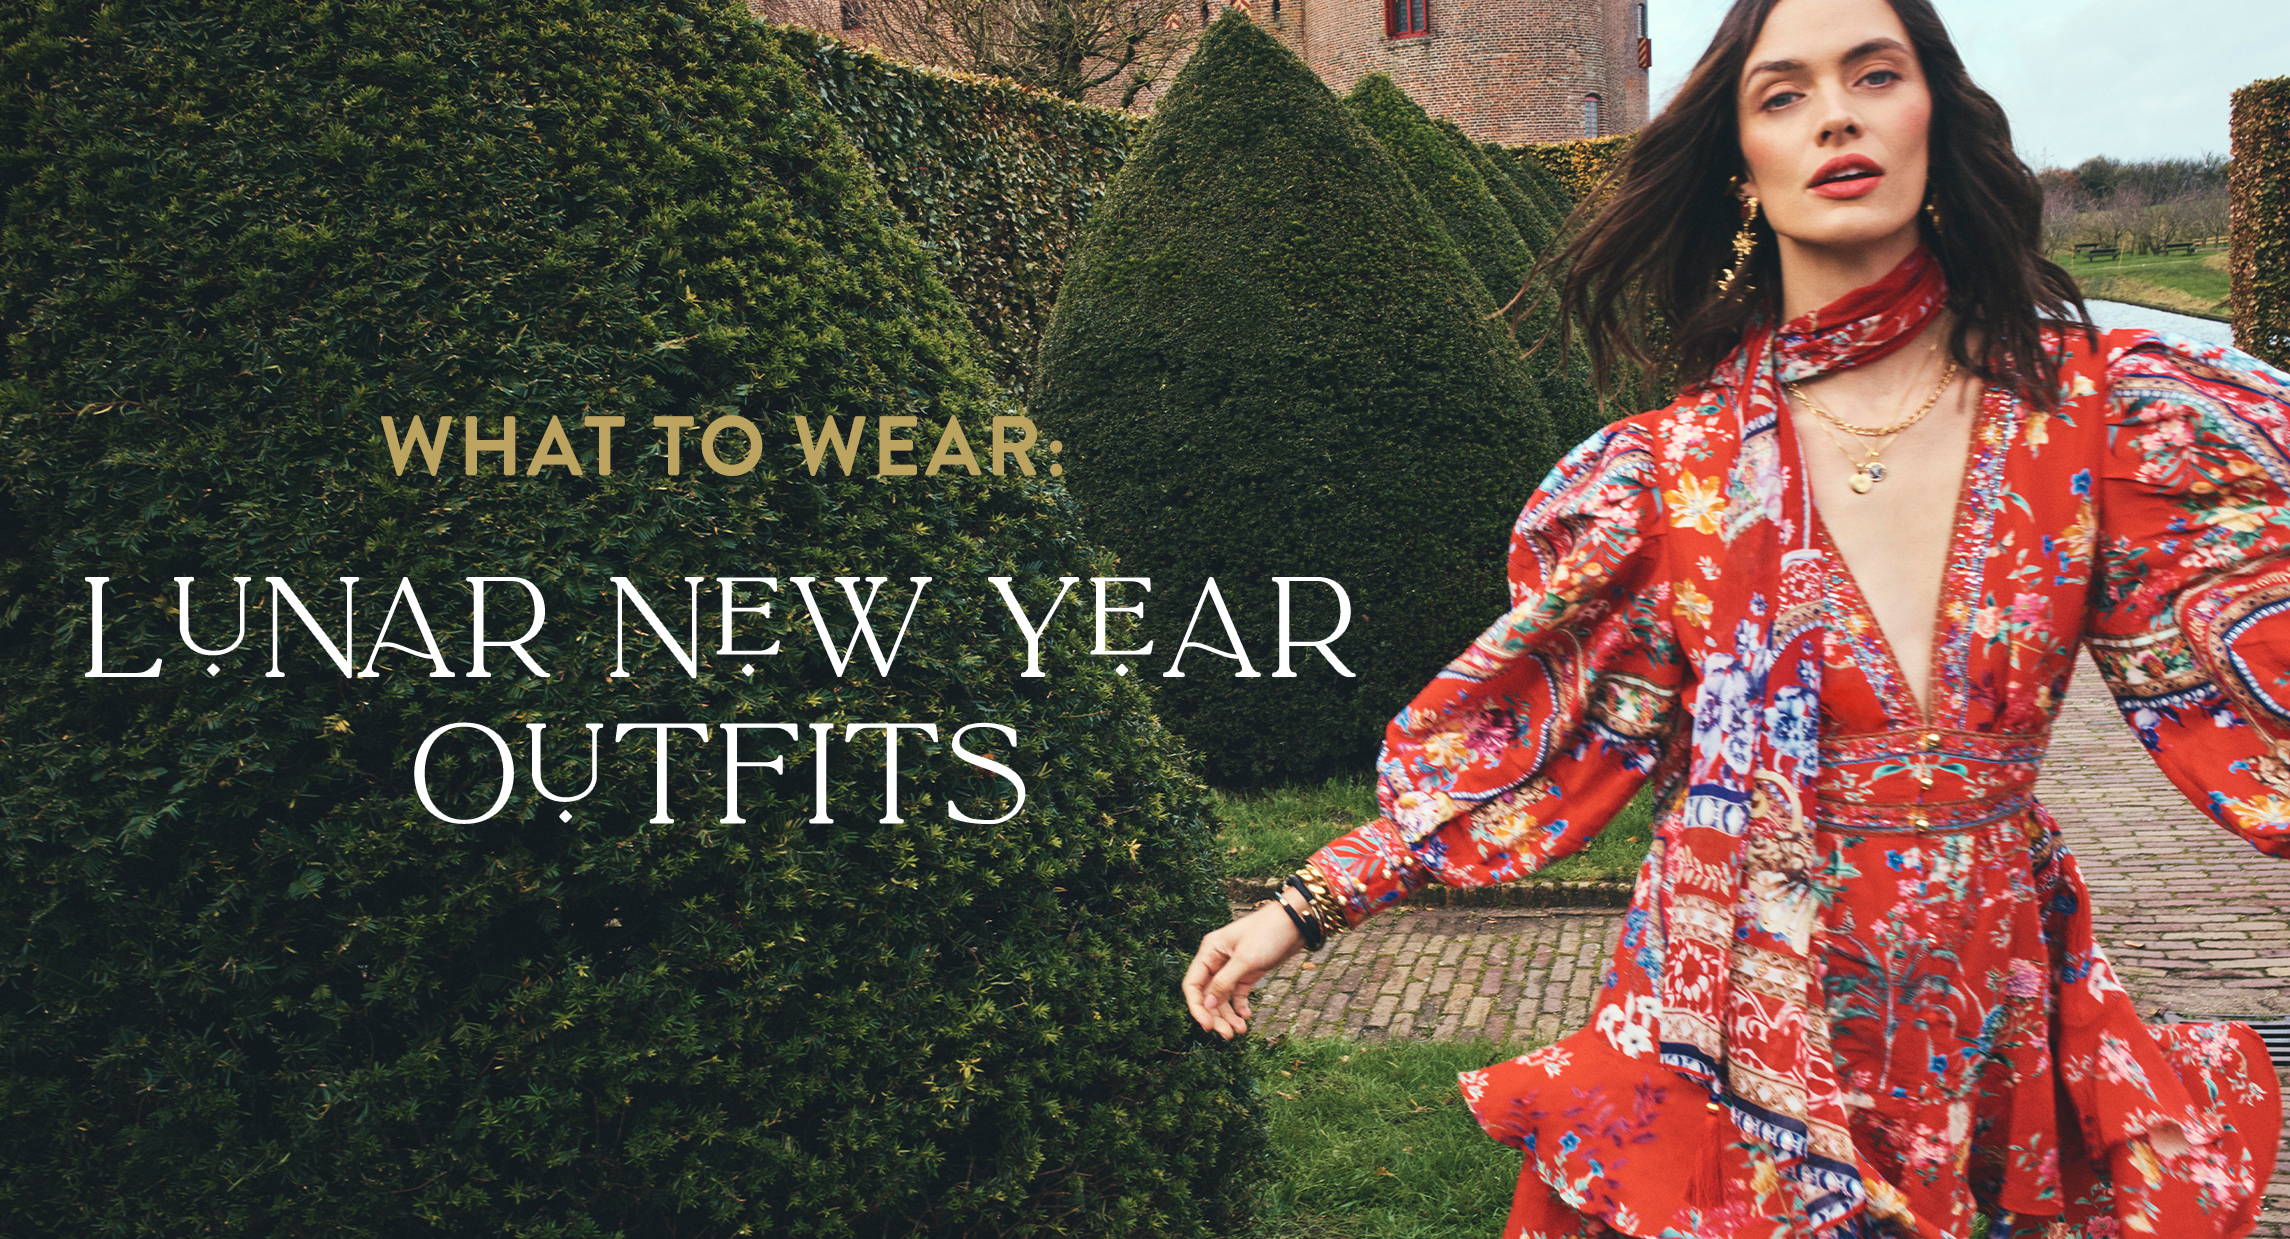 WHAT TO WEAR: LUNAR NEW YEAR OUTFITS